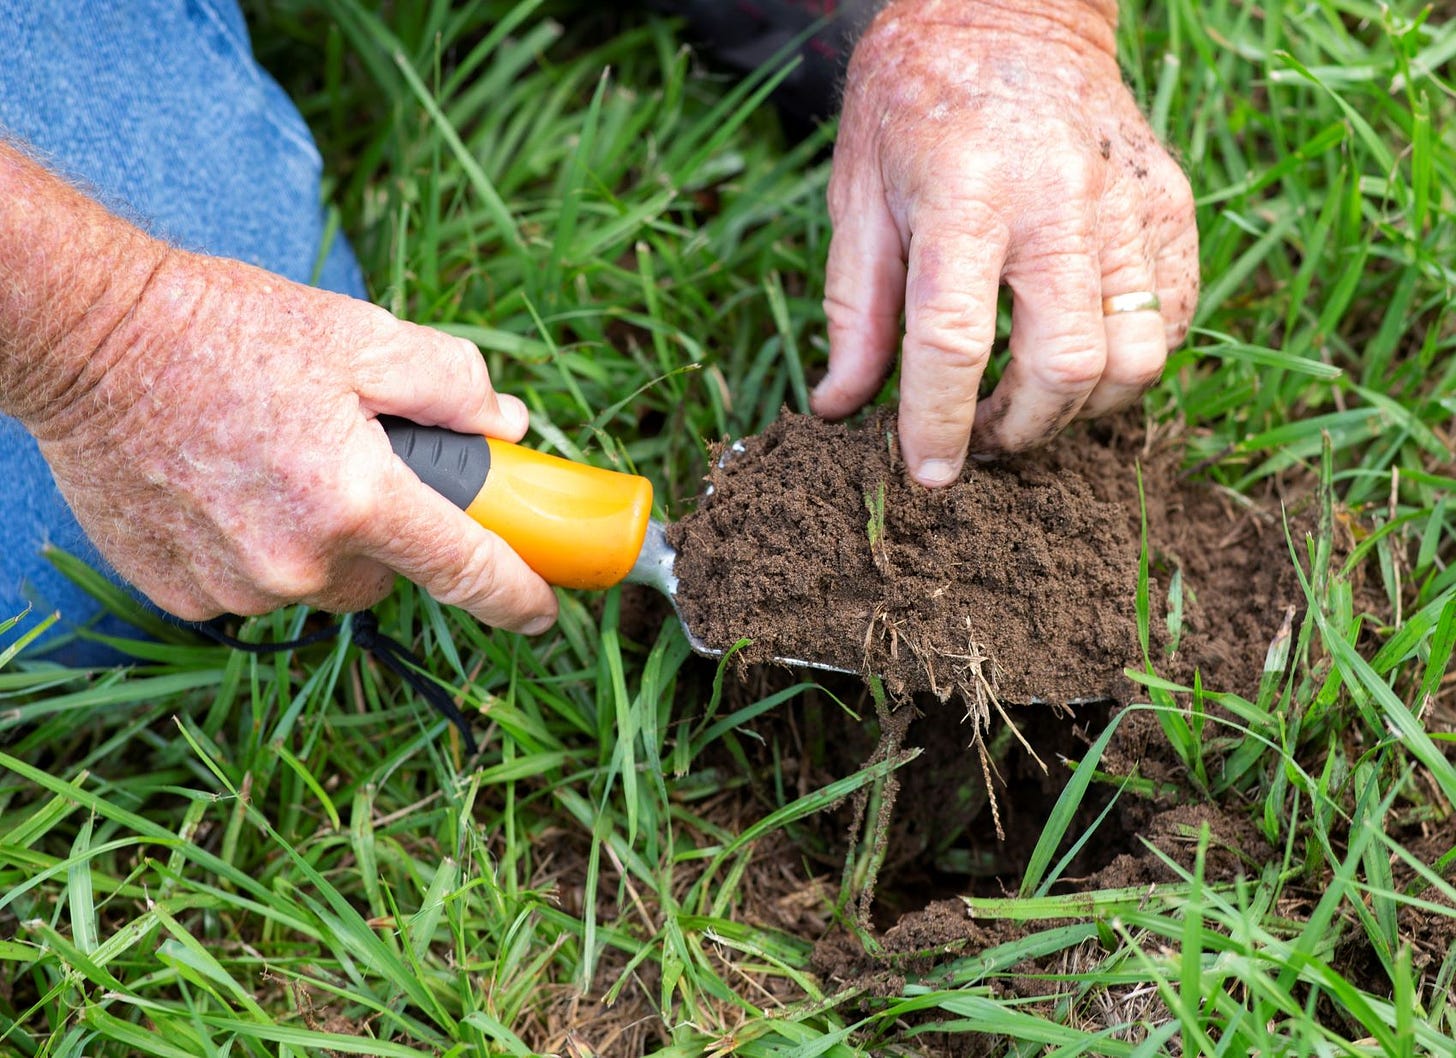 A person taking a soil sample from a lawn.